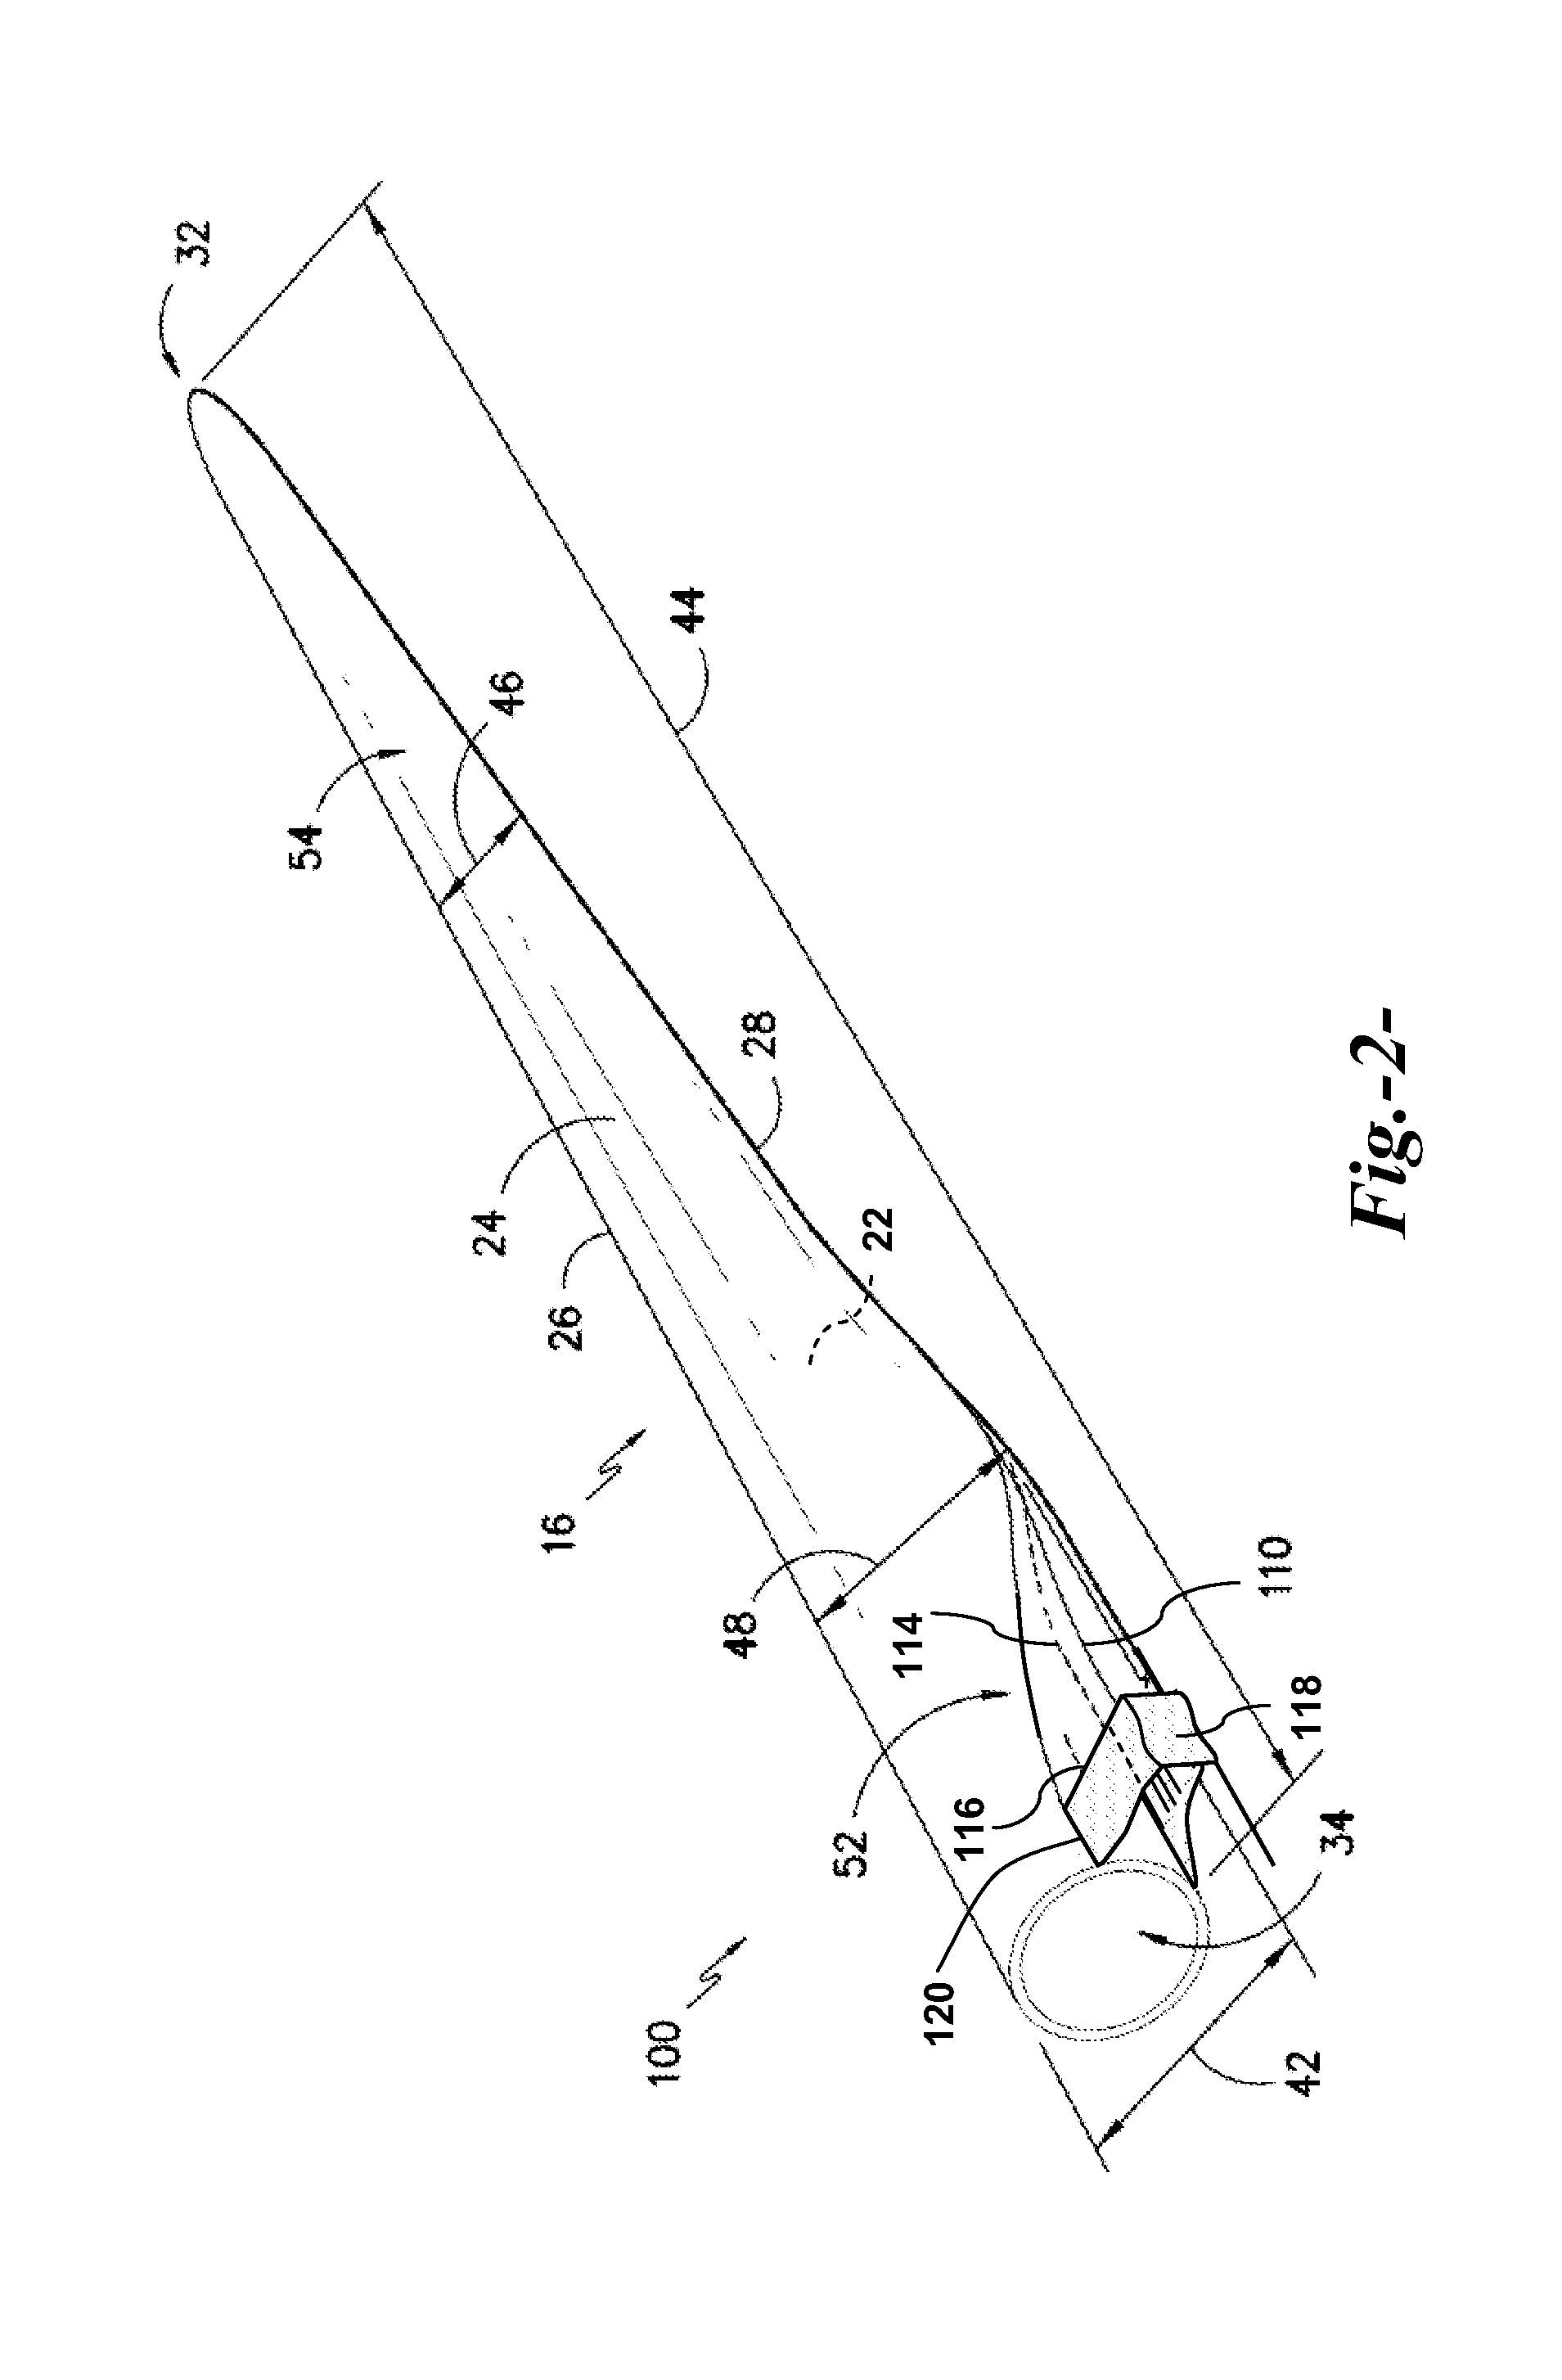 Wind turbine rotor blade assembly with root curtain